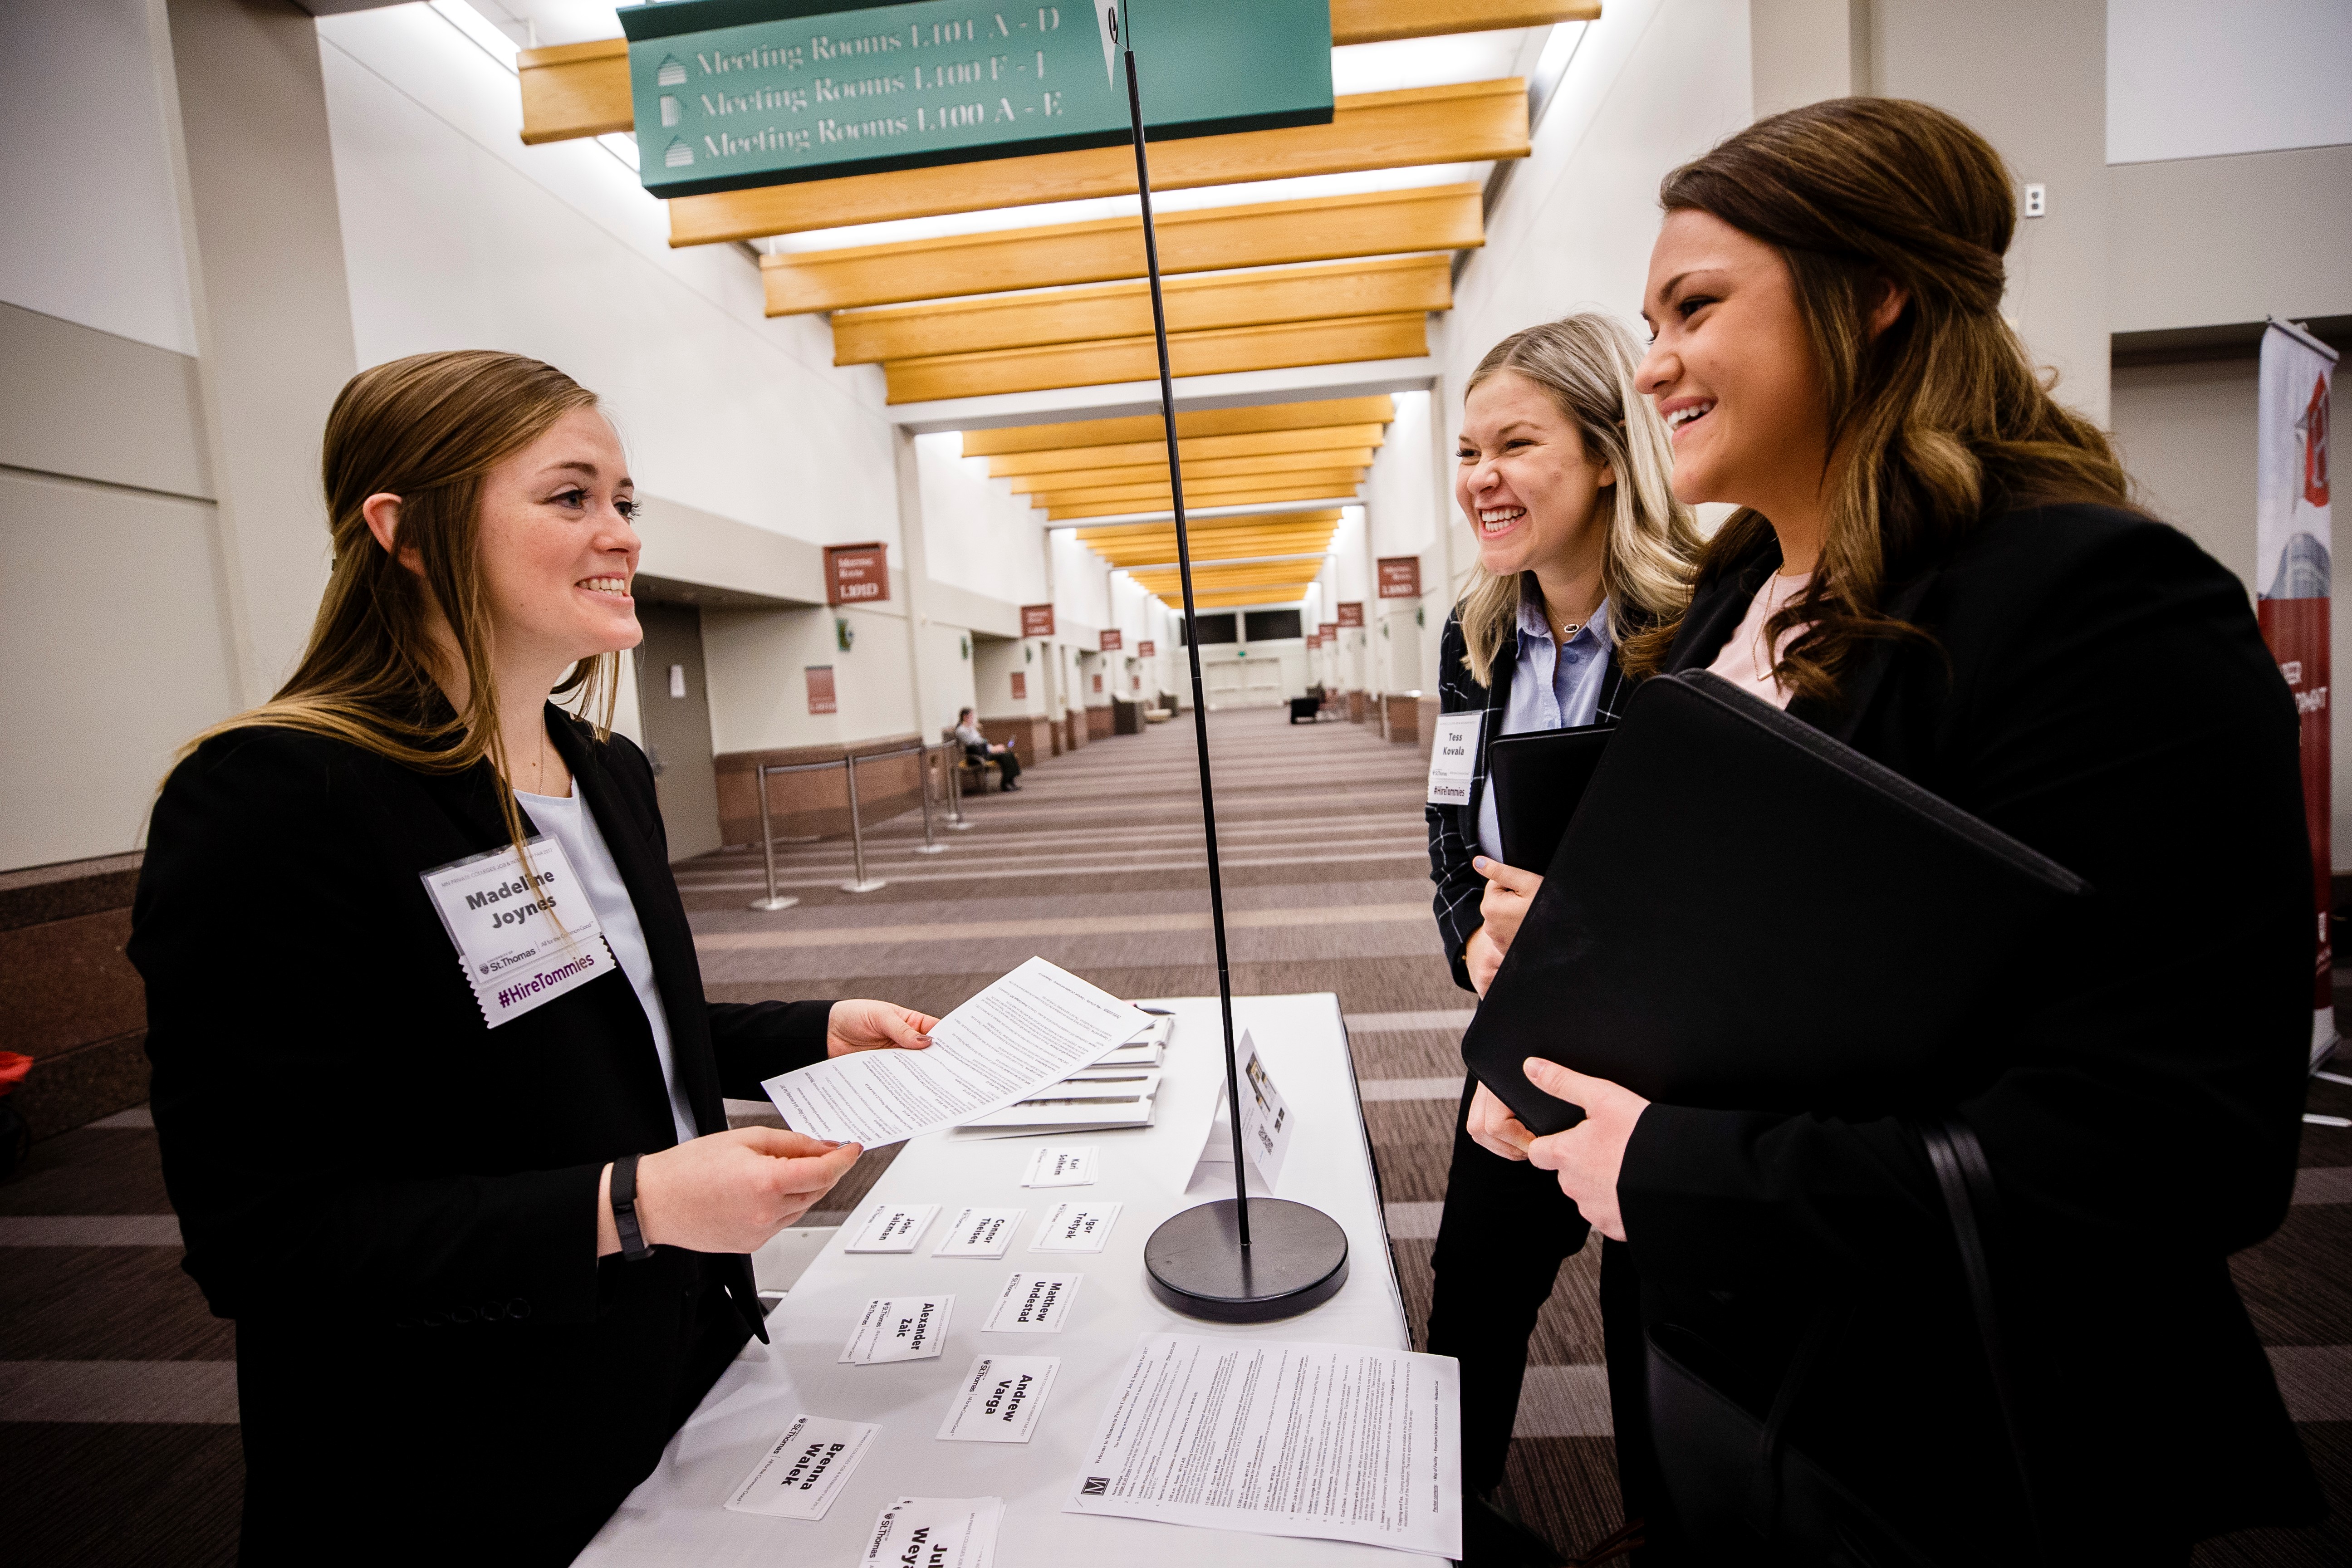 Two students register for a career fair